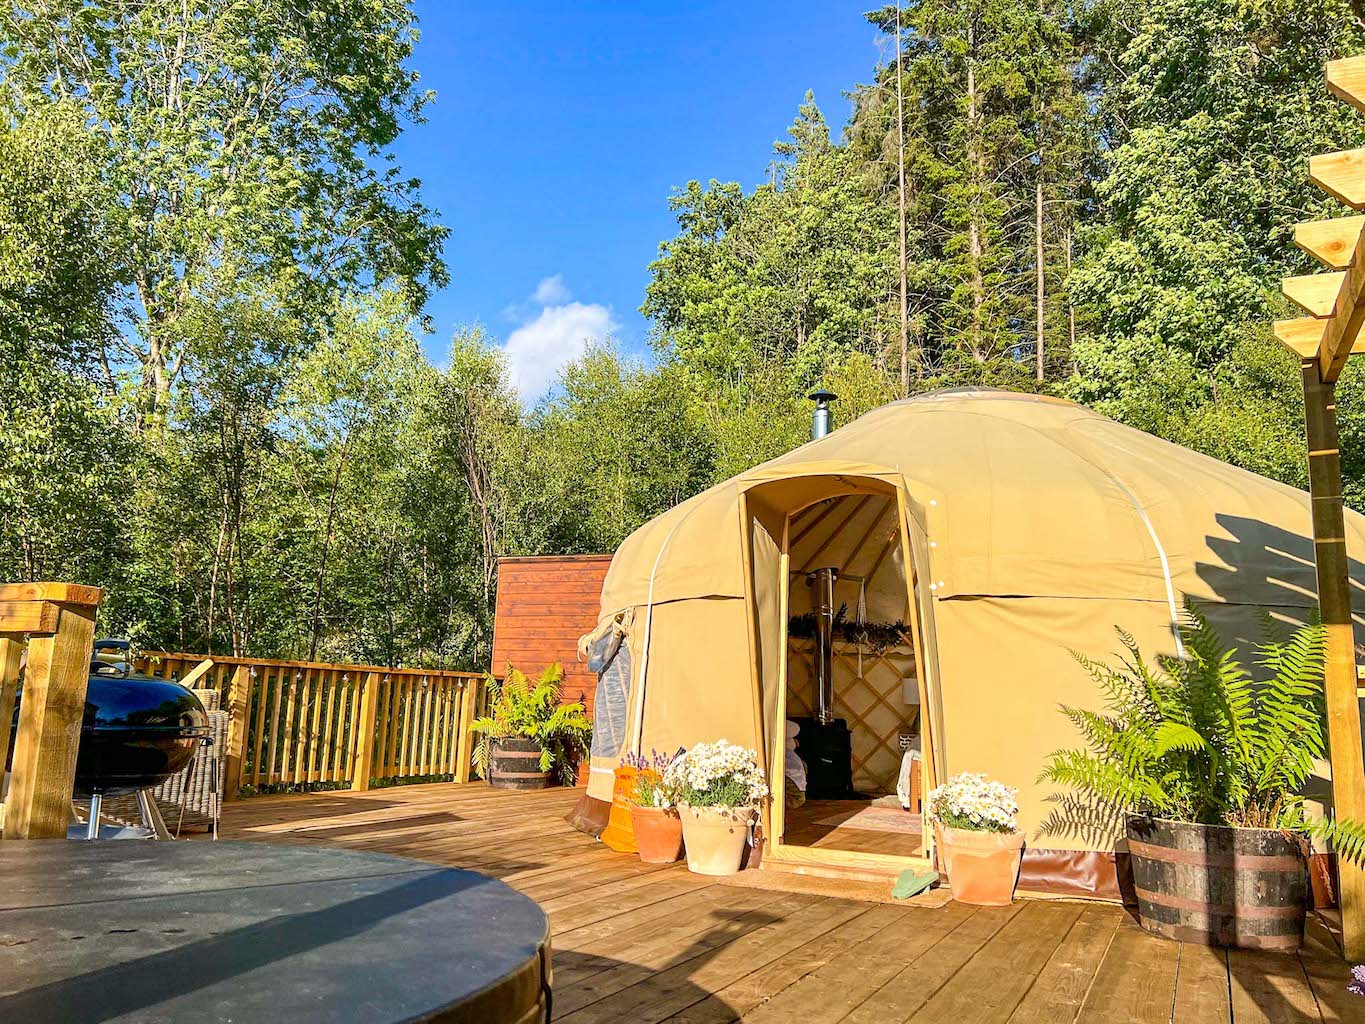 The Wandering Quinn Travel Blog Glamping in Yorkshire, Yurtshire